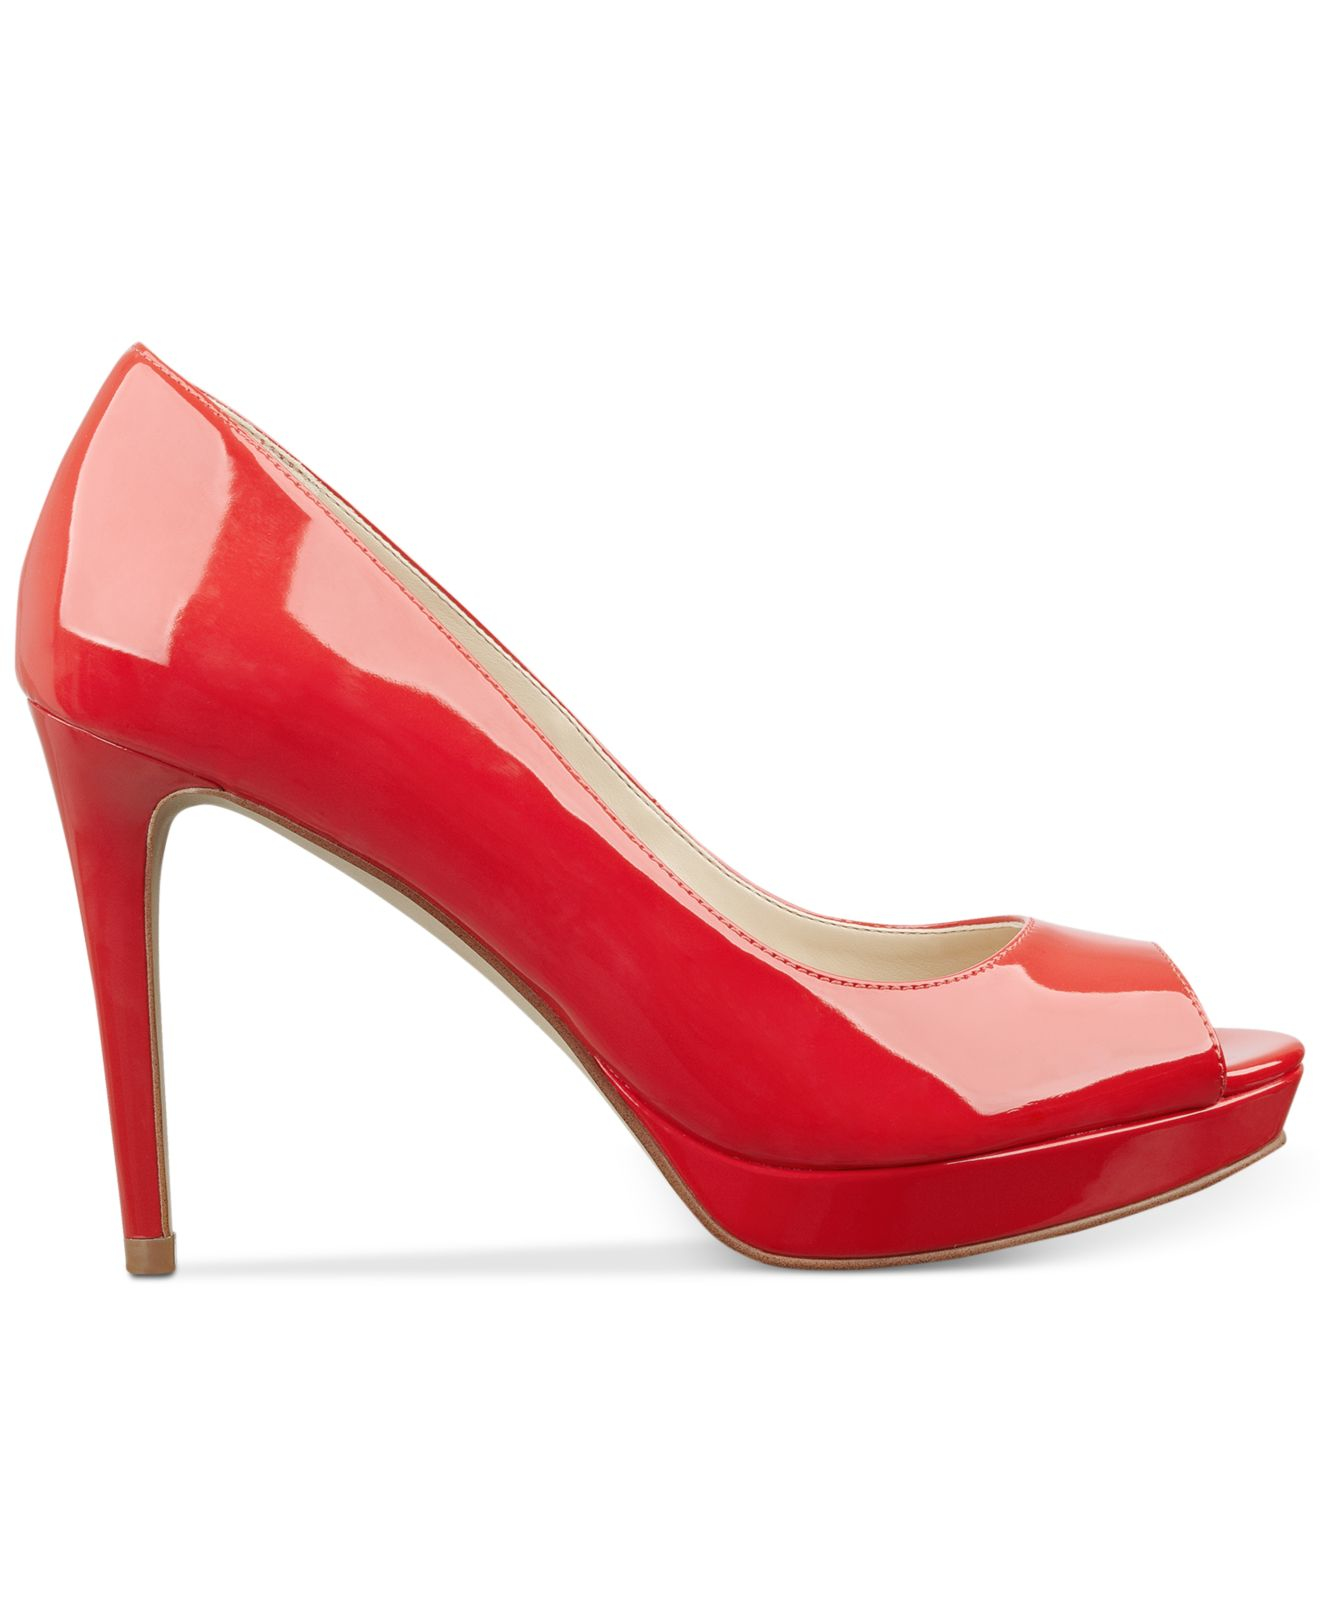 marc fisher patent leather pumps